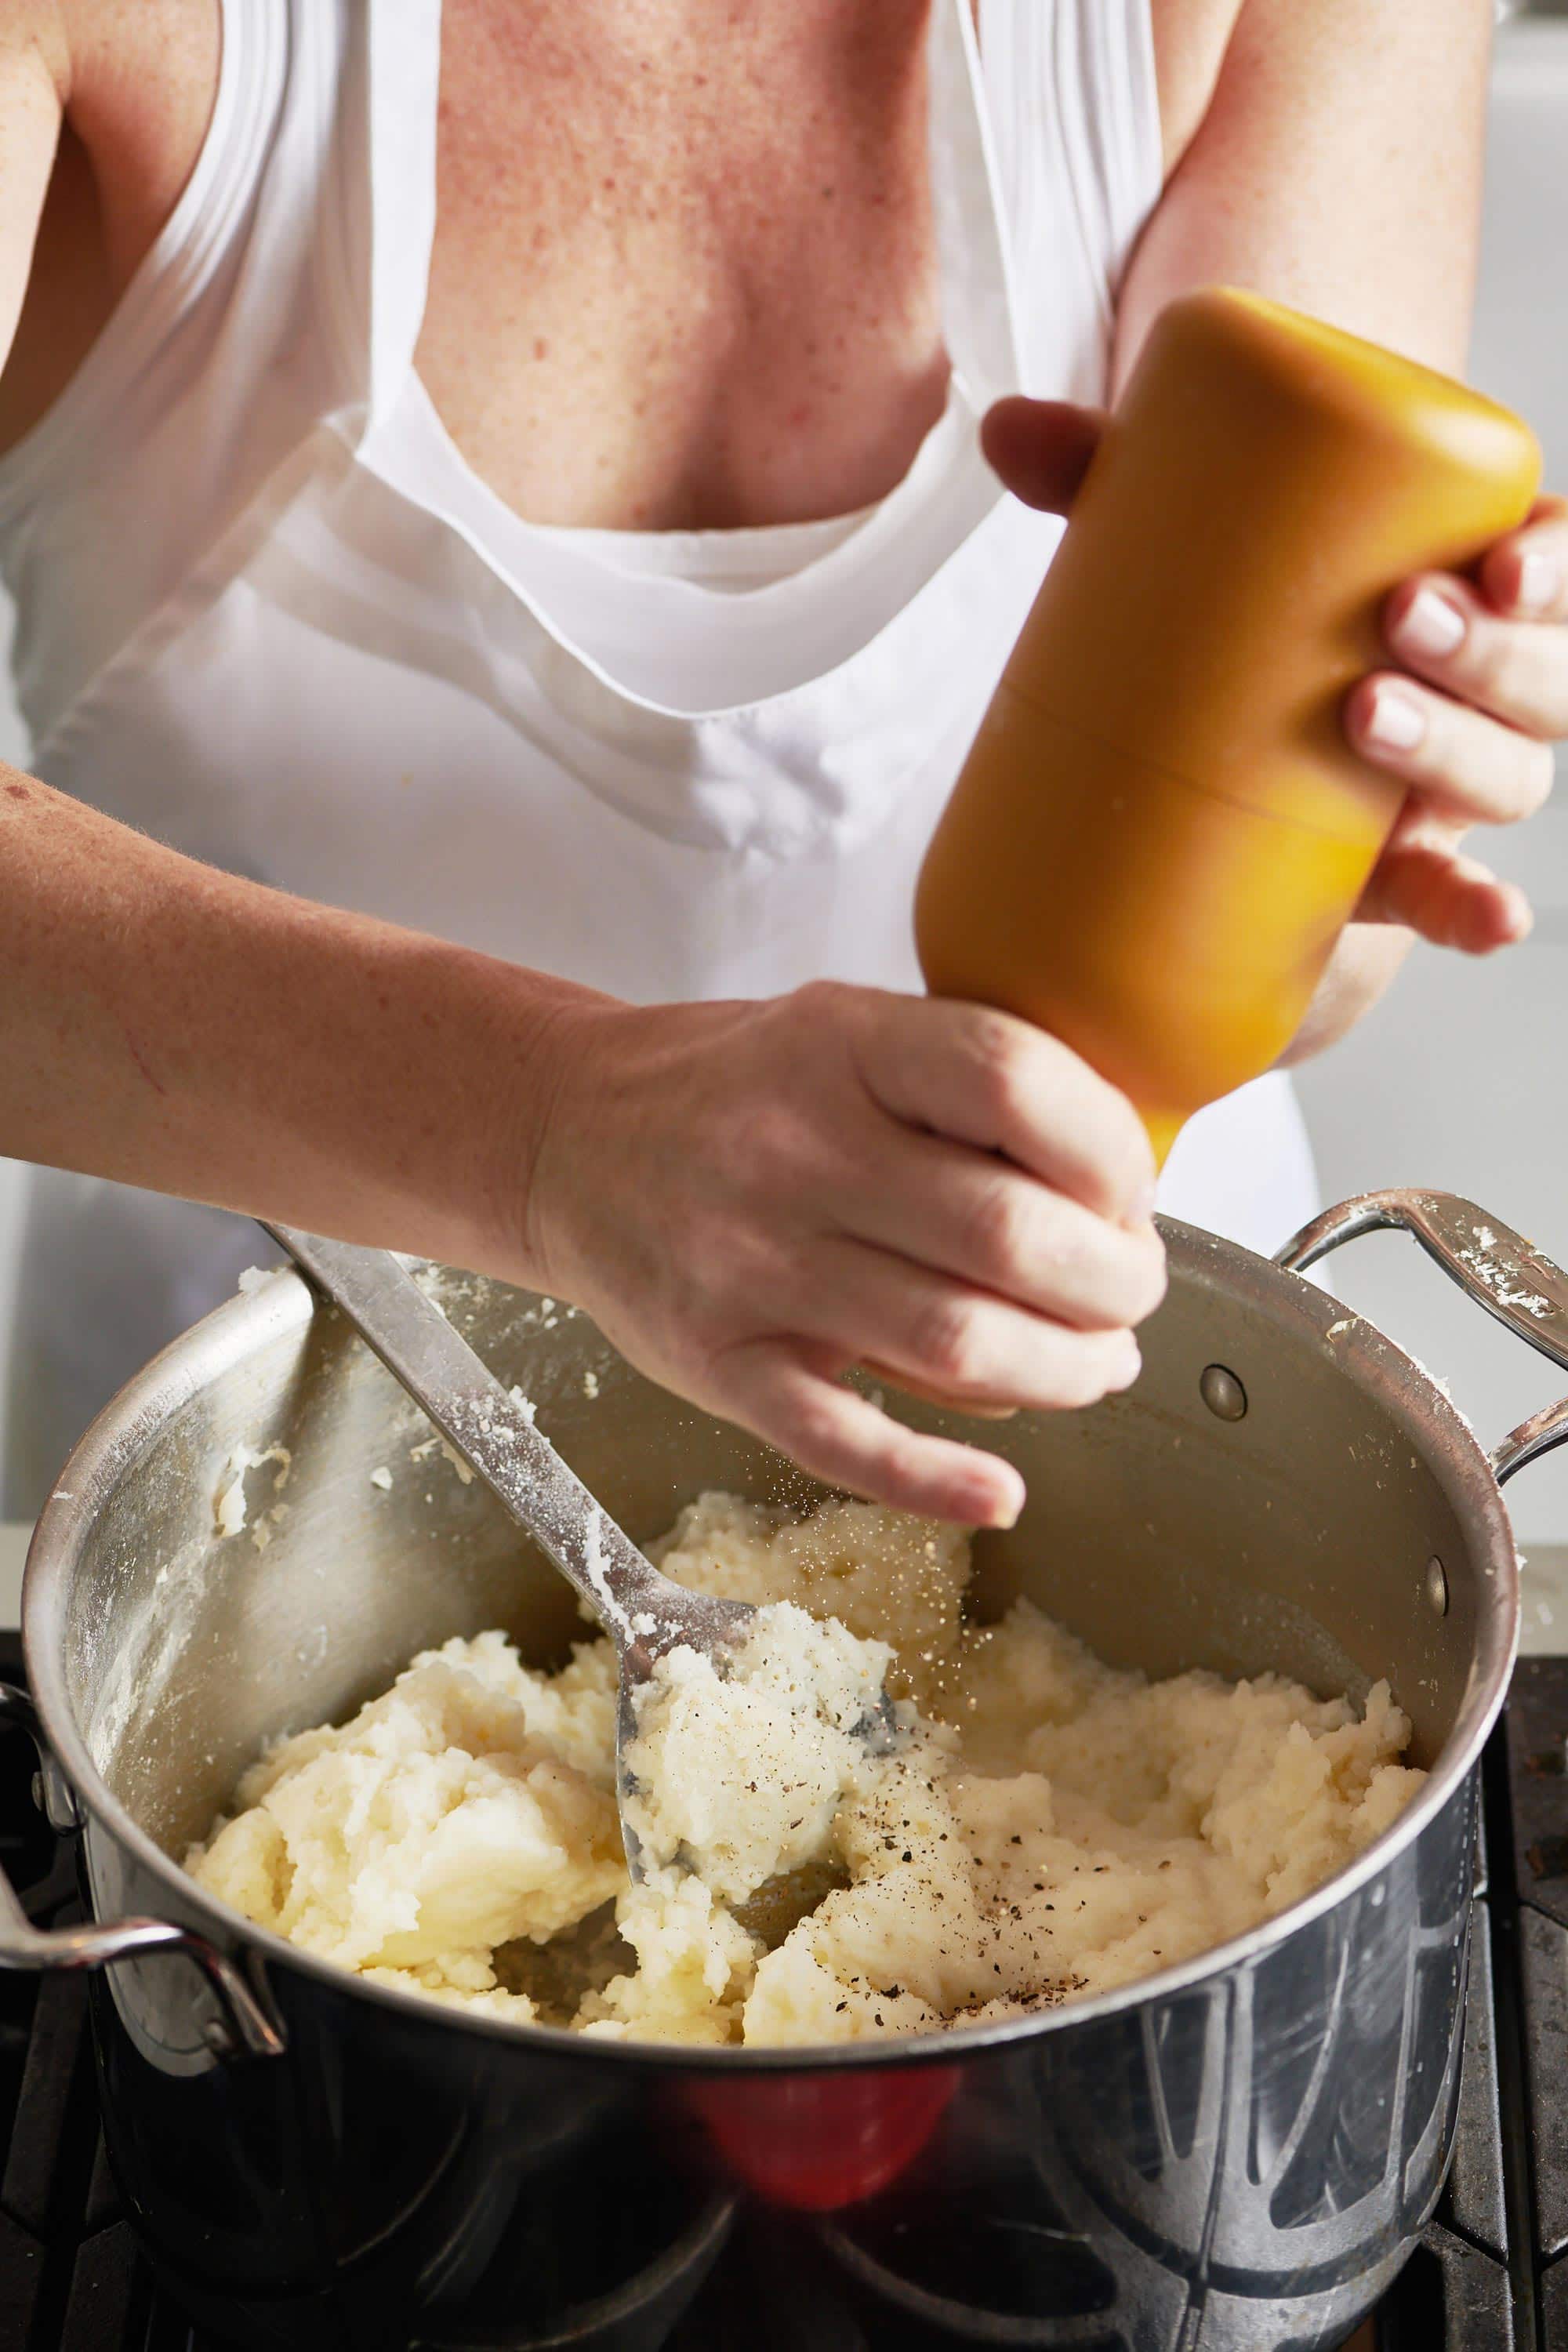 Woman grinding pepper into a pot of mashed potatoes.